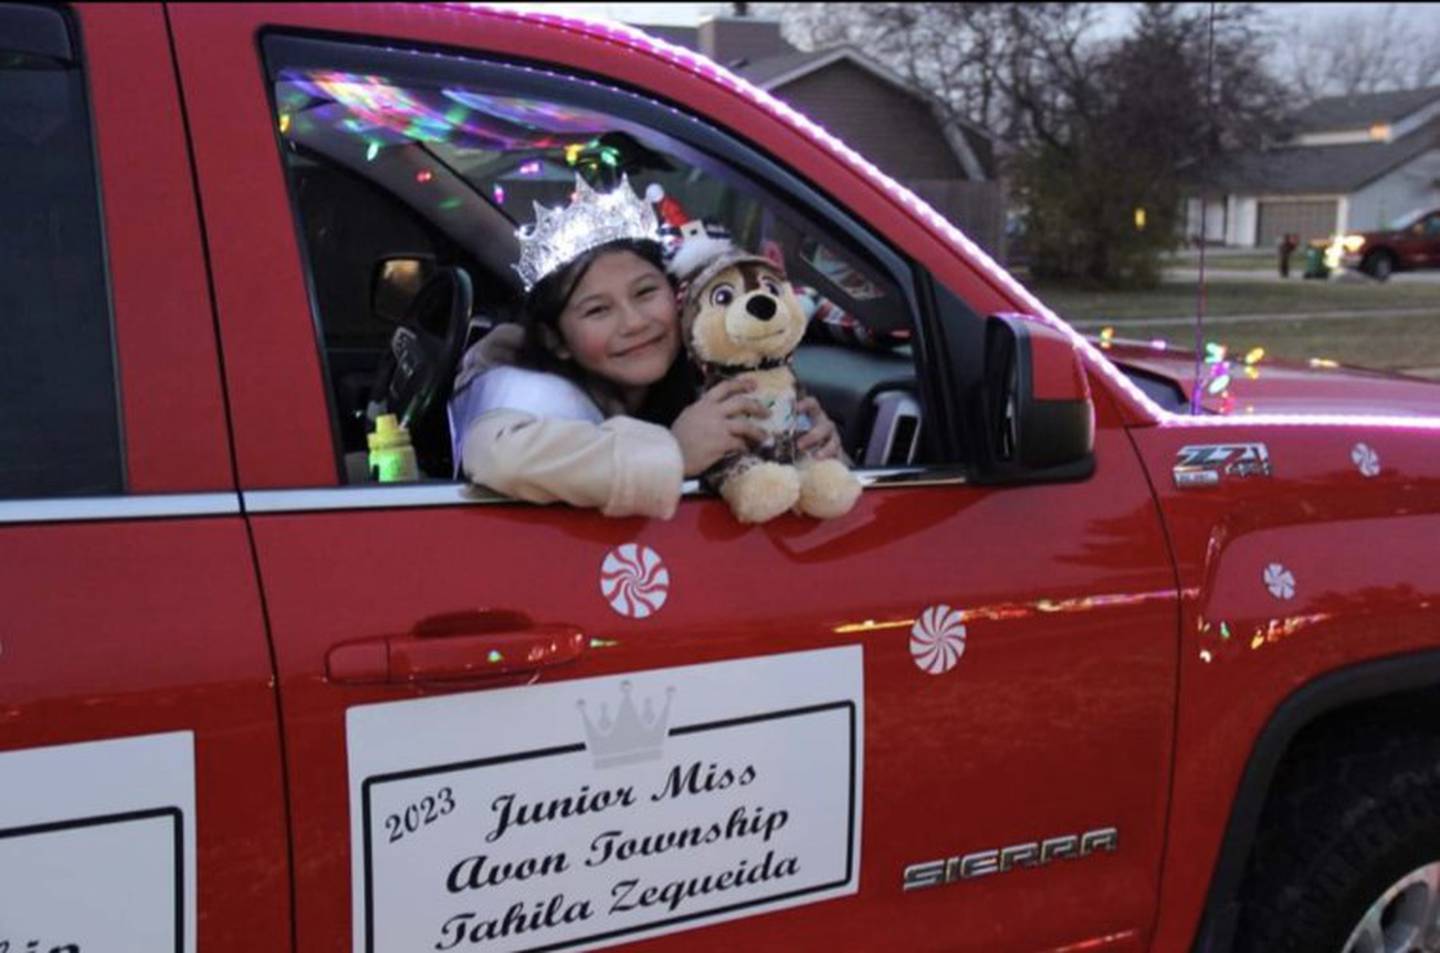 Max gets a squeeze from Junior Miss Avon Township Tahila Zequeida during a recent parade.